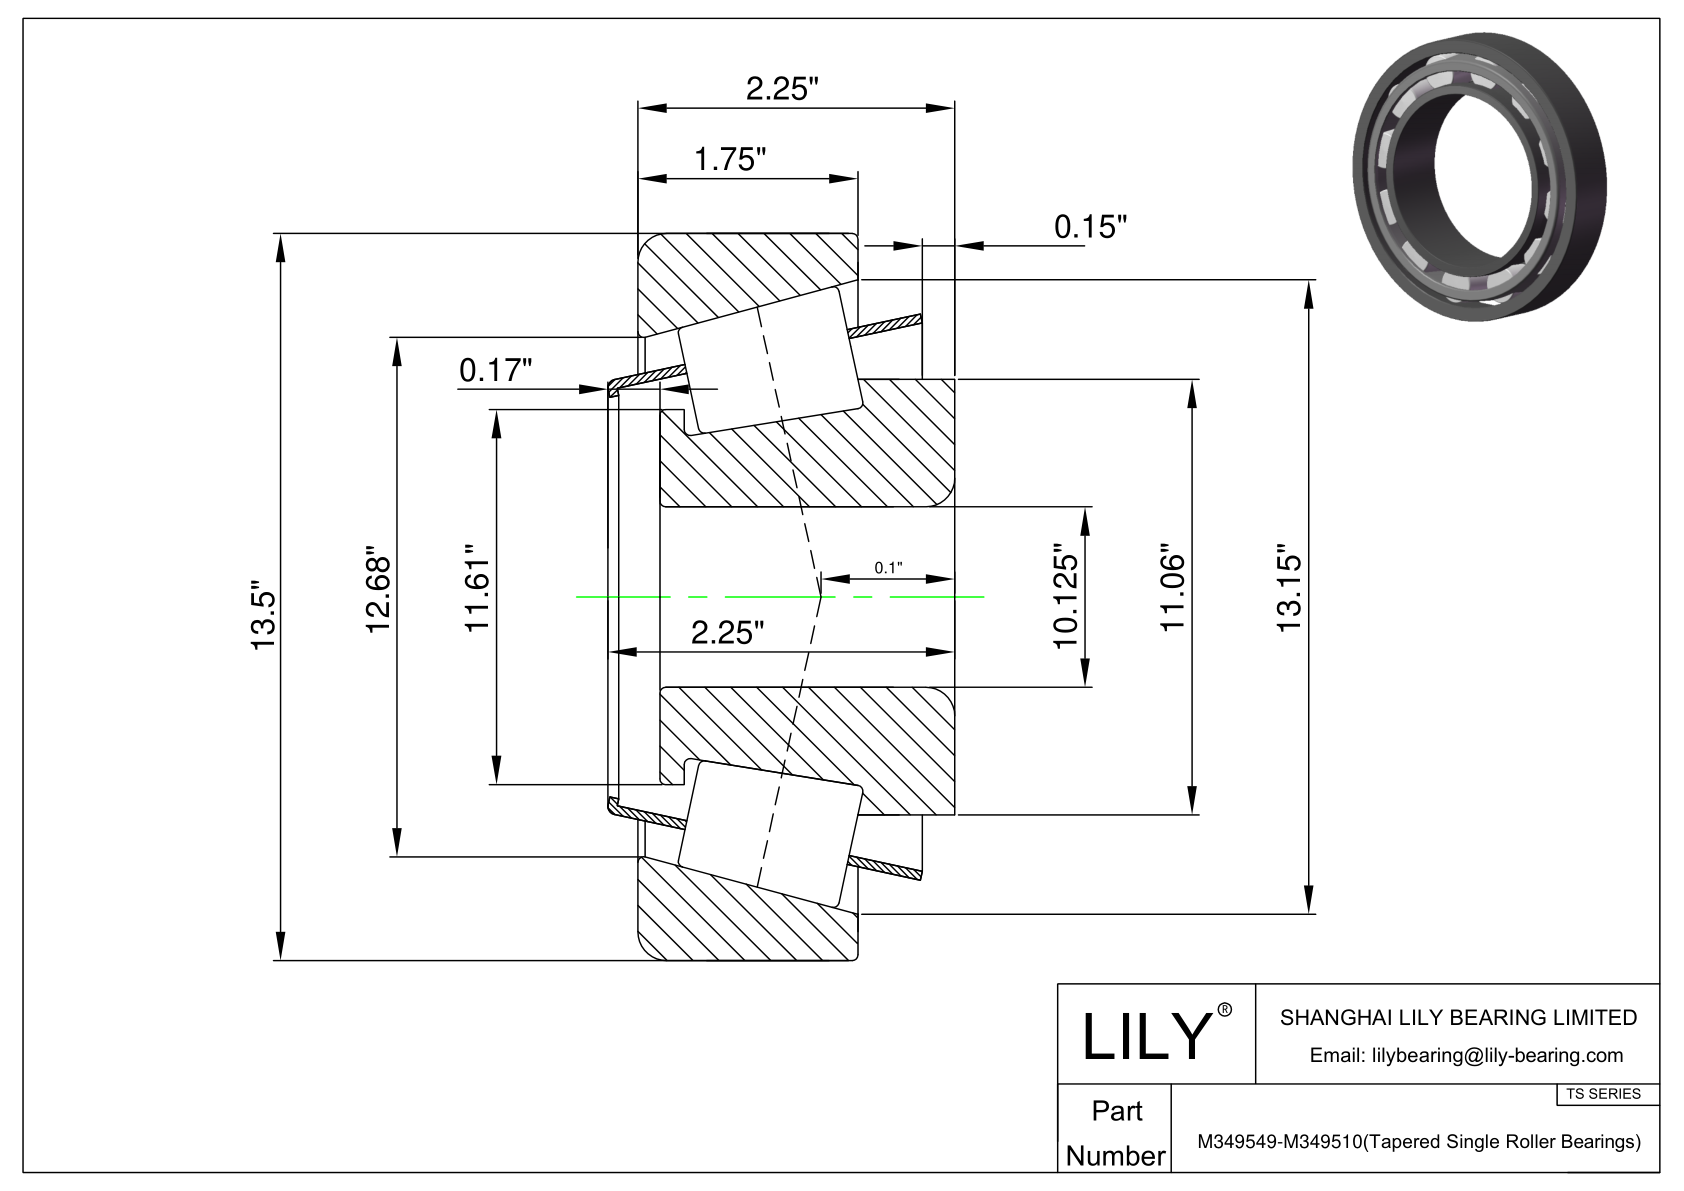 M349549-M349510 TS (Tapered Single Roller Bearings) (Imperial) cad drawing